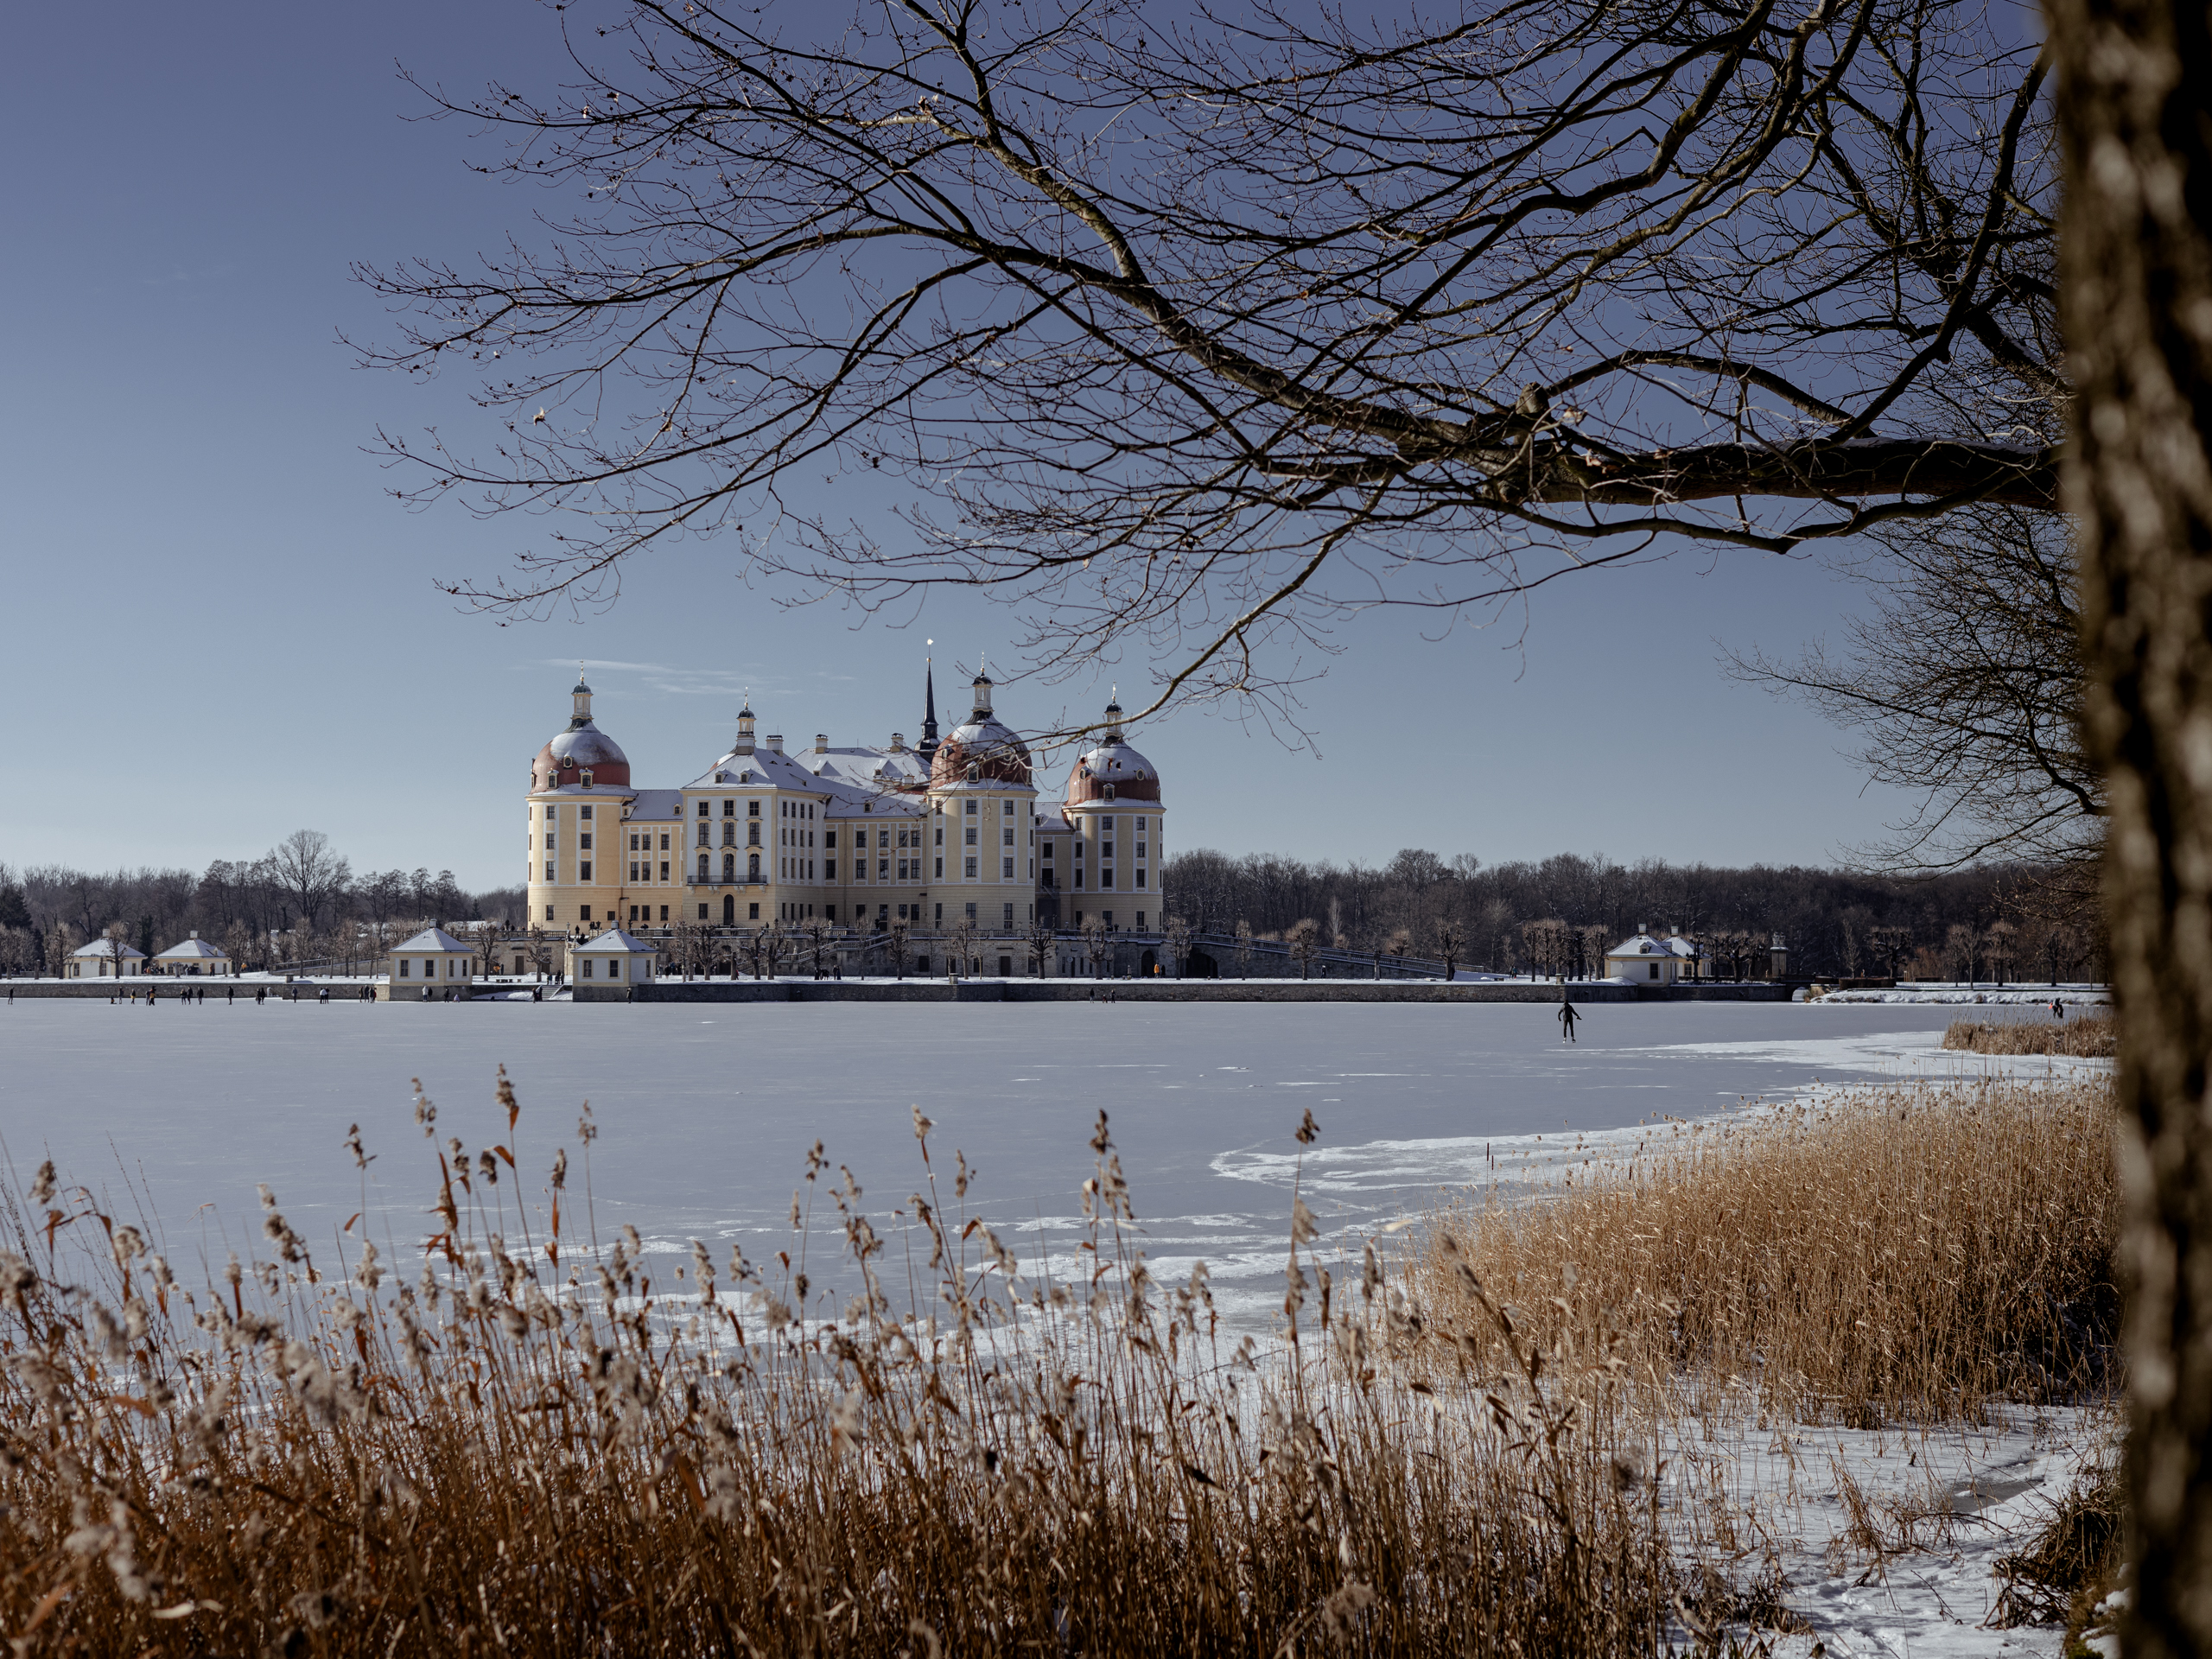 schloss moritzburg in winter surrounded by a large frozen pond